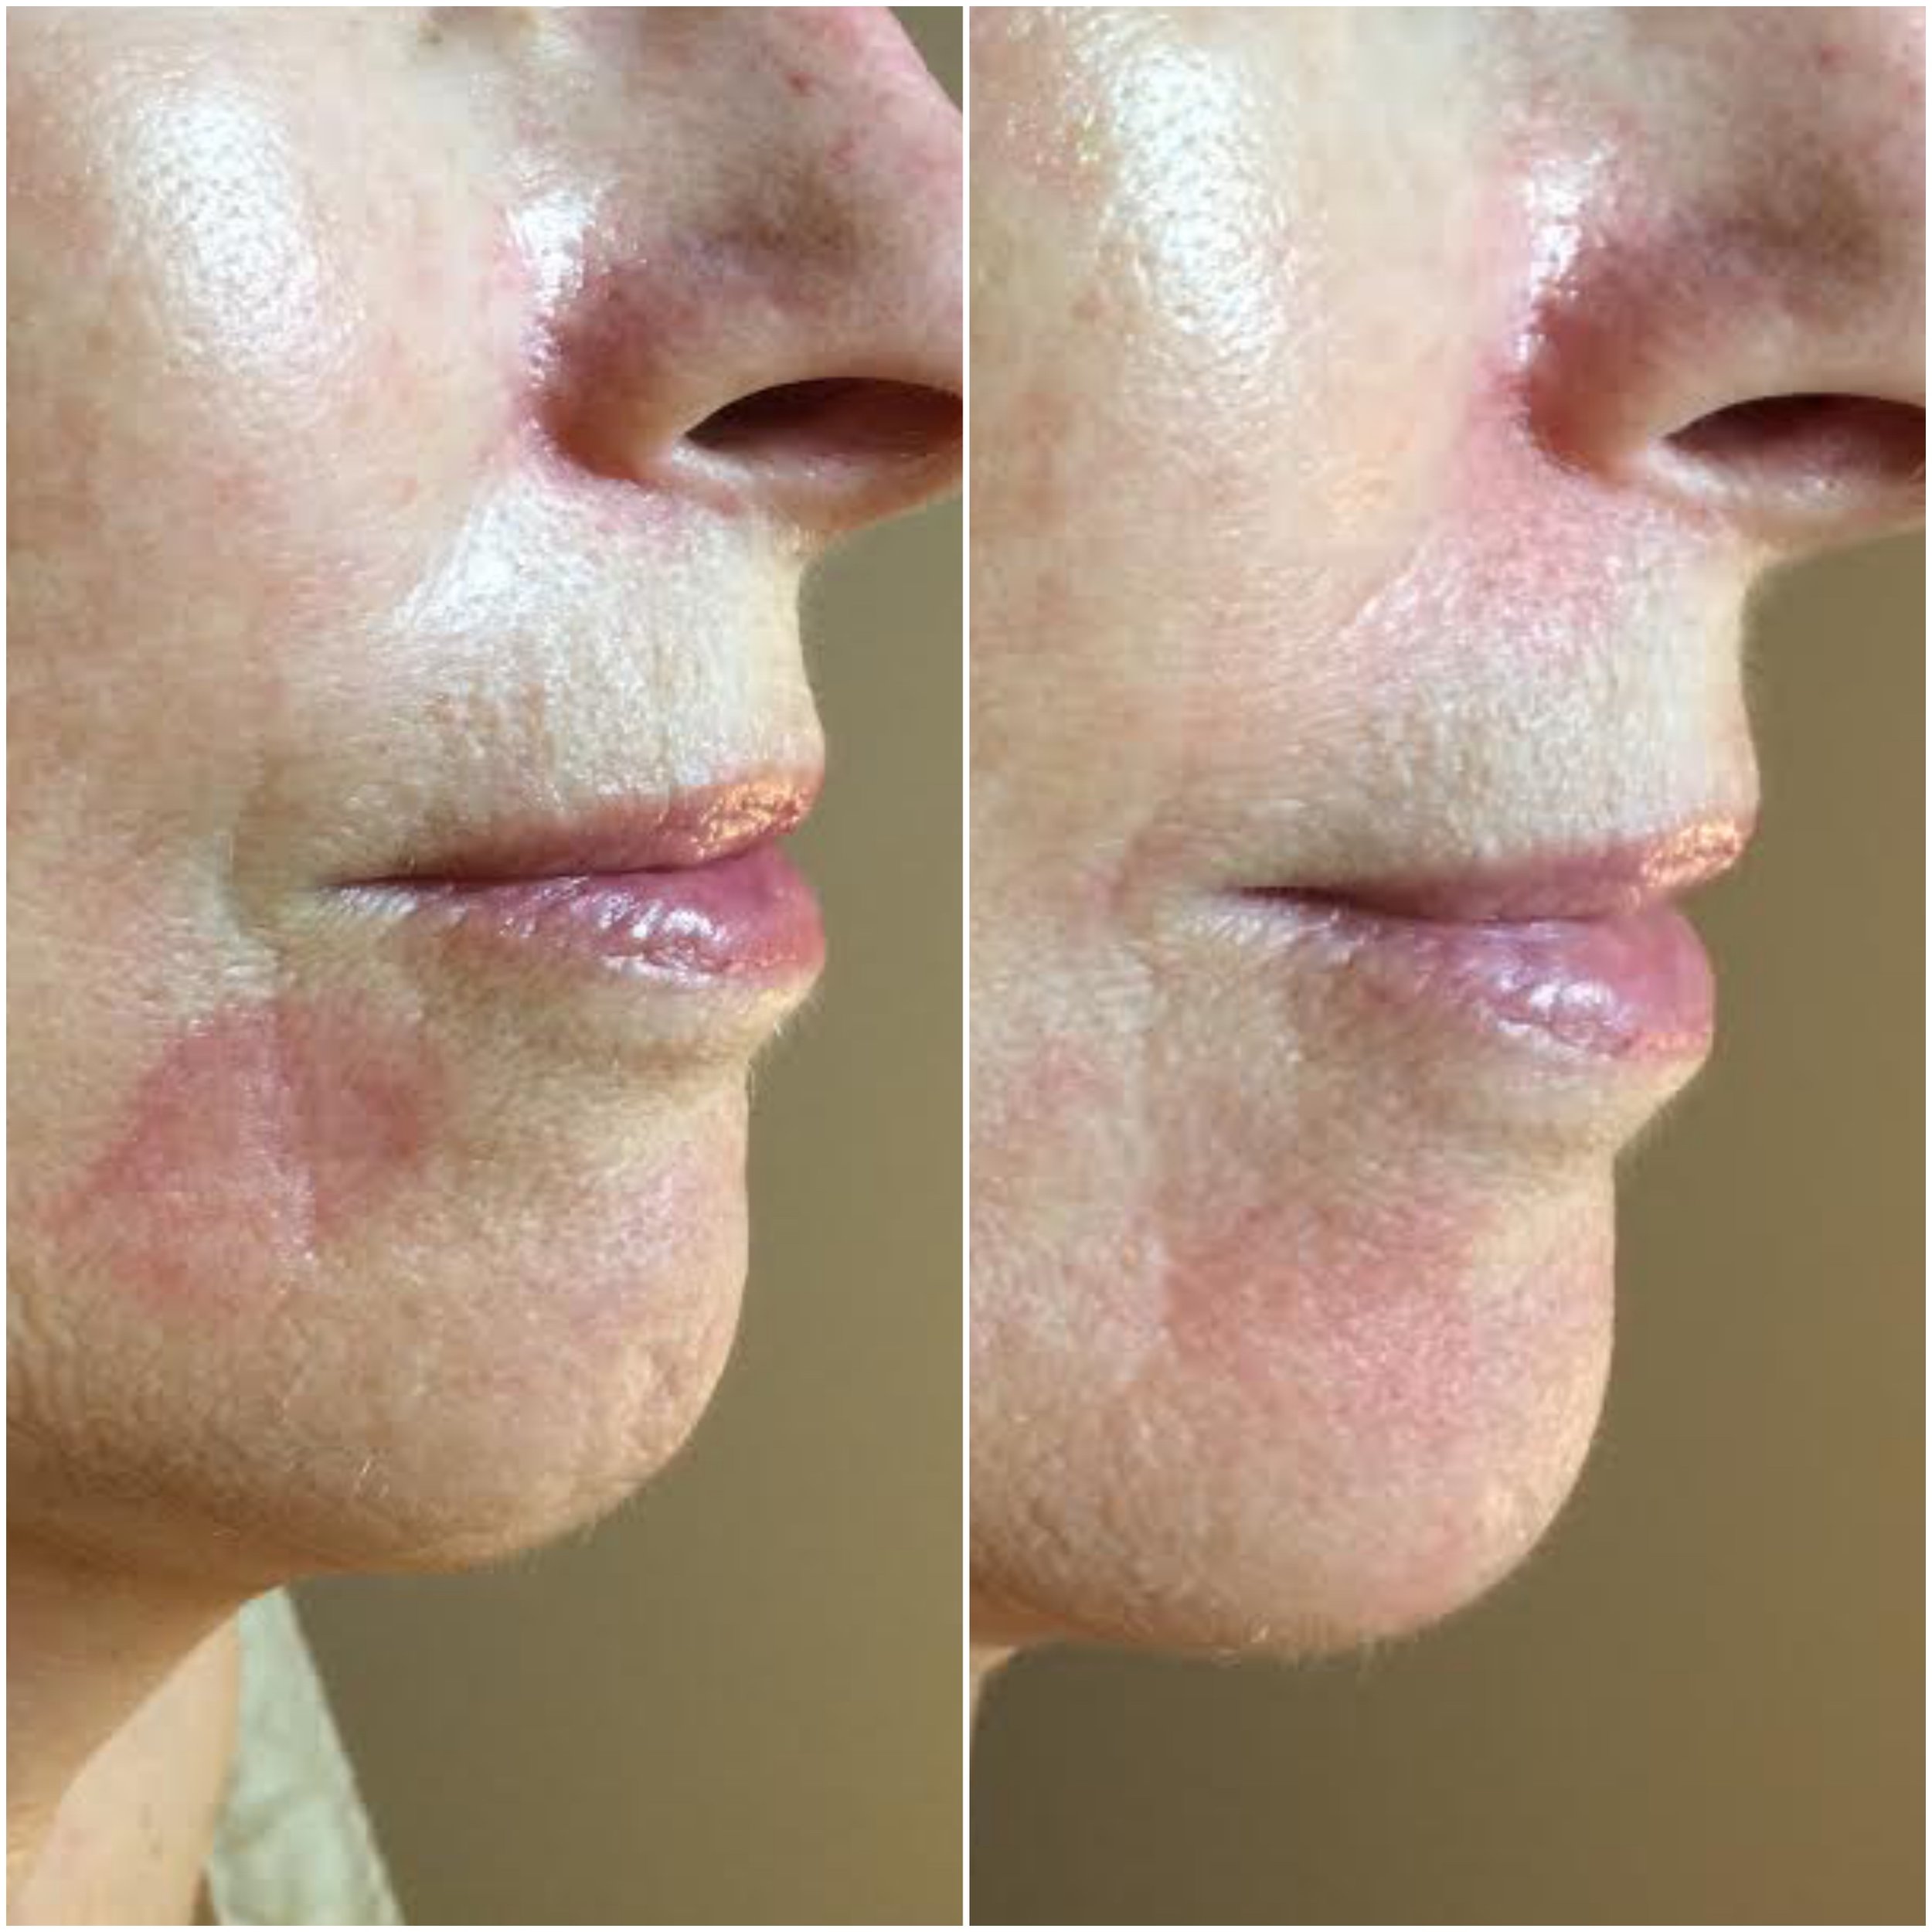   Erythema reduced, fine lines filled using human stem cell microneedling series  